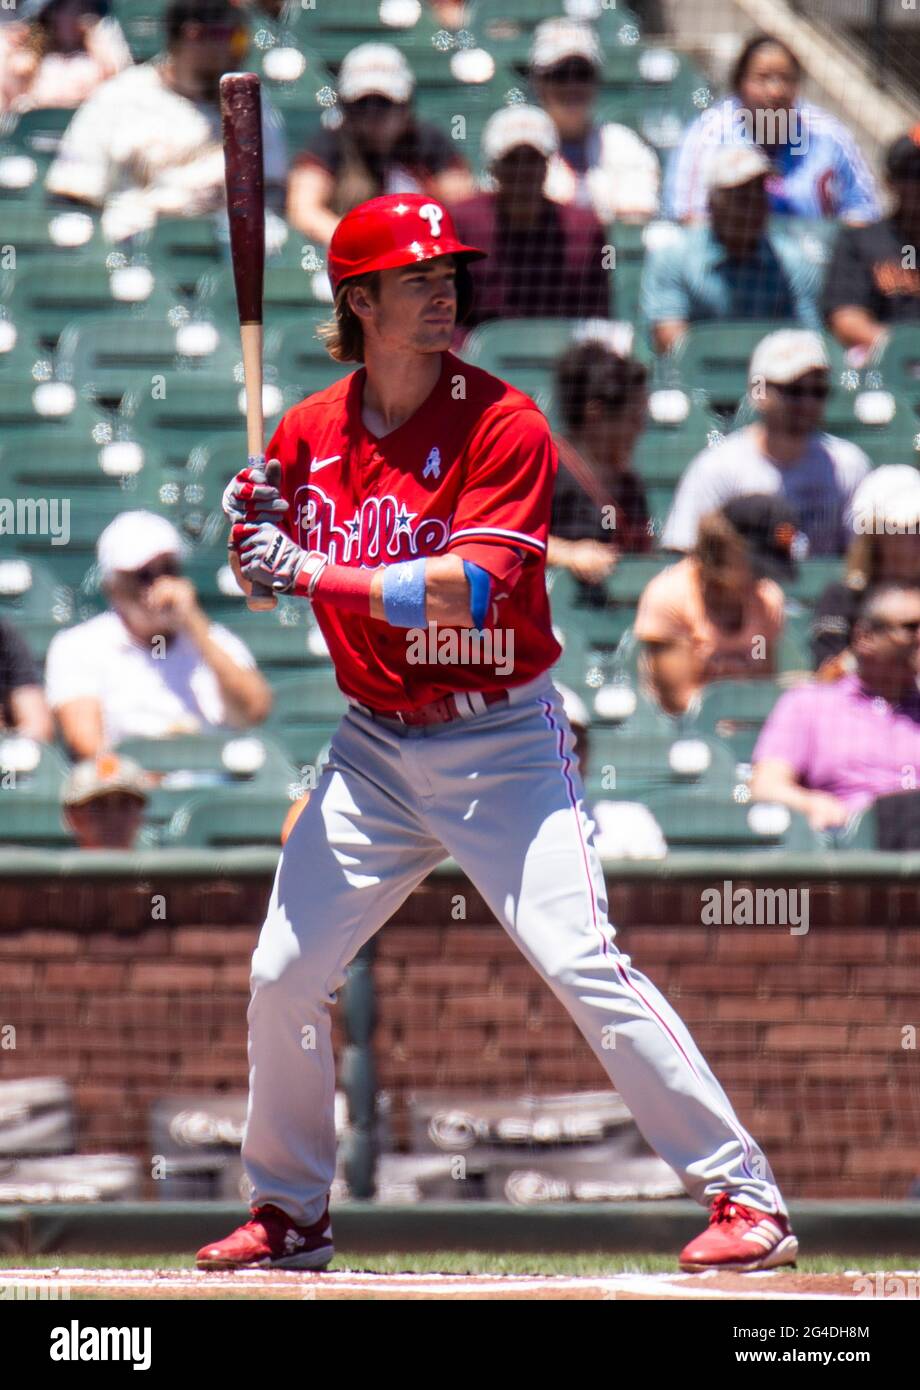 June 20 2021 San Francisco CA, U.S.A. The Phillies catcher J.T. Realmuto  (10) up at bat during the MLB game between the Philadelphia Phillies and  San Francisco Giants, Phillies lost 11-2 at